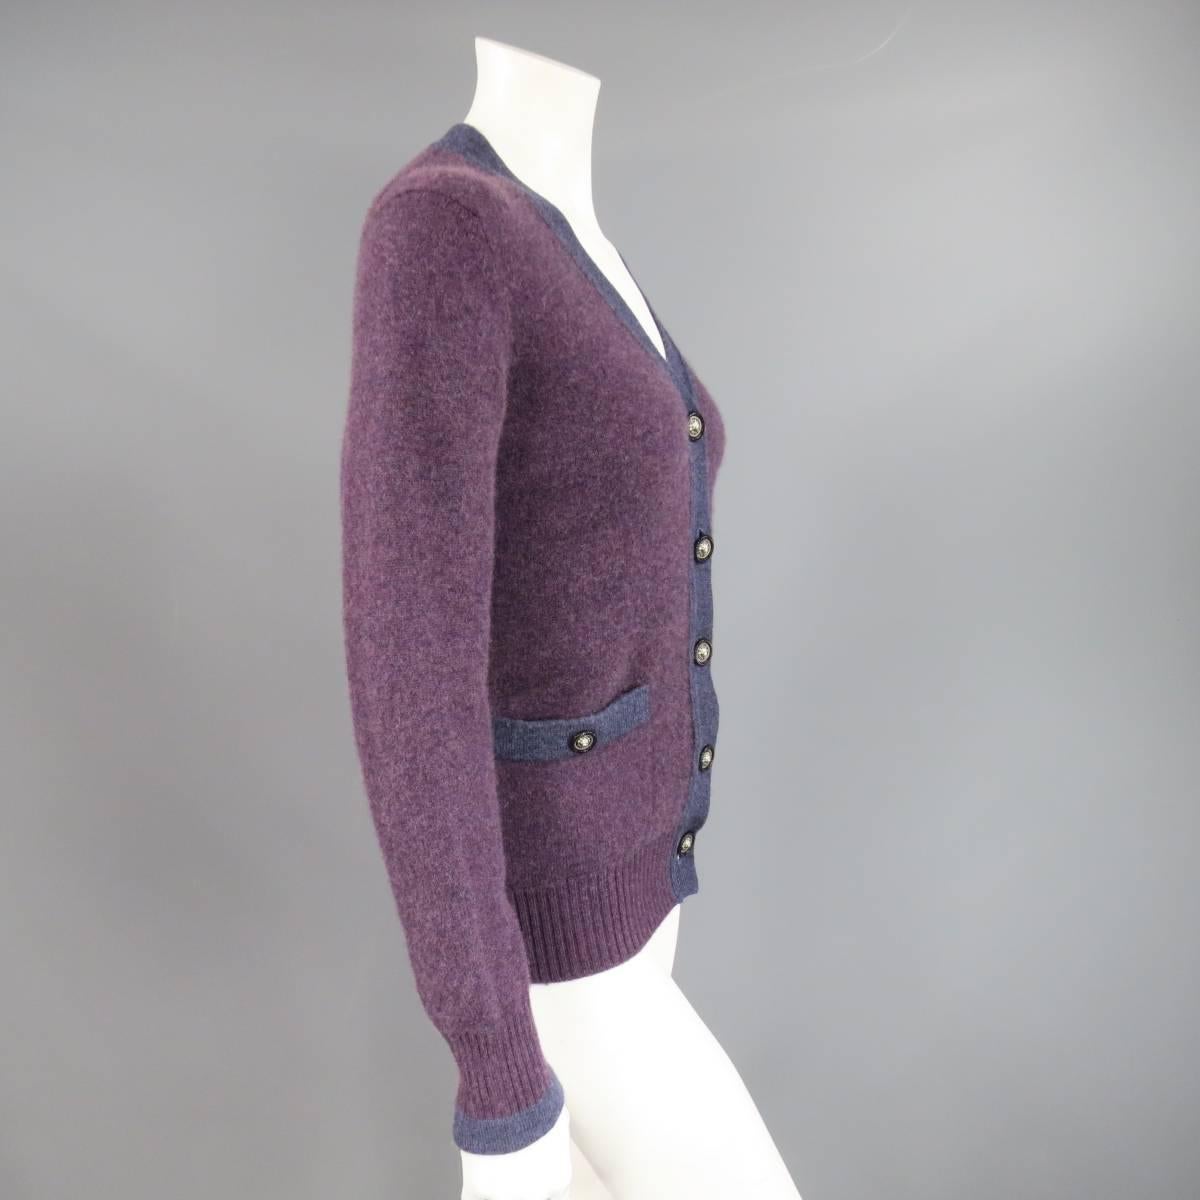 This classic CHANEL cardigan comes in a two tone plum purple cashmere with a deep V neck, double patch pockets, and silver tone lion head buttons. Made in The UK.
 
Good Pre-Owned Condition.
Marked: 42
 
Measurements:
 
Shoulder: 16.5